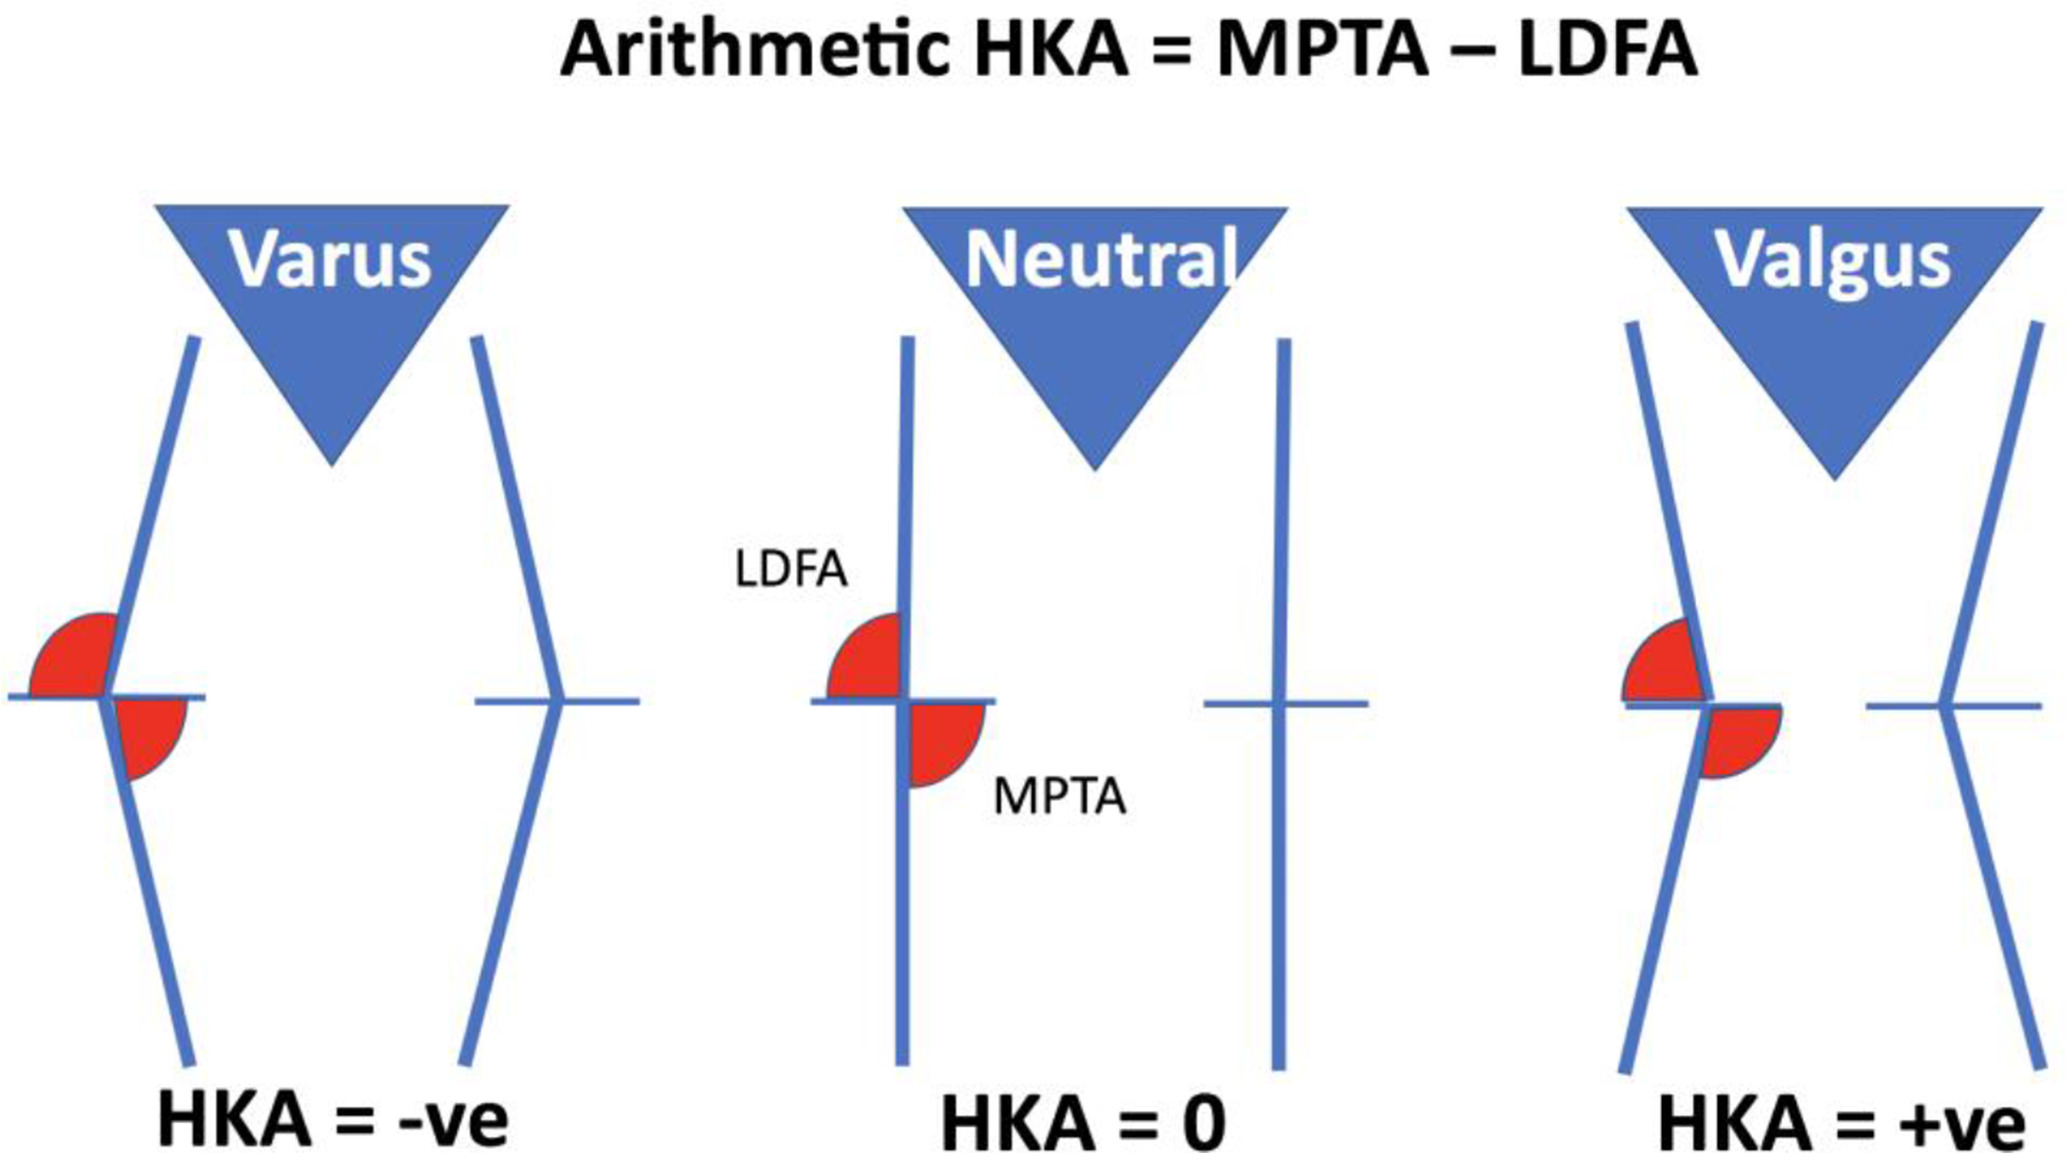 Fig. 2 
            Relationship between the lateral distal femoral angle (LDFA) and medial proximal tibial angle (MPTA) in varus, neutral, and valgus lower limb alignment with the arithmetic hip-knee-ankle (aHKA).
          